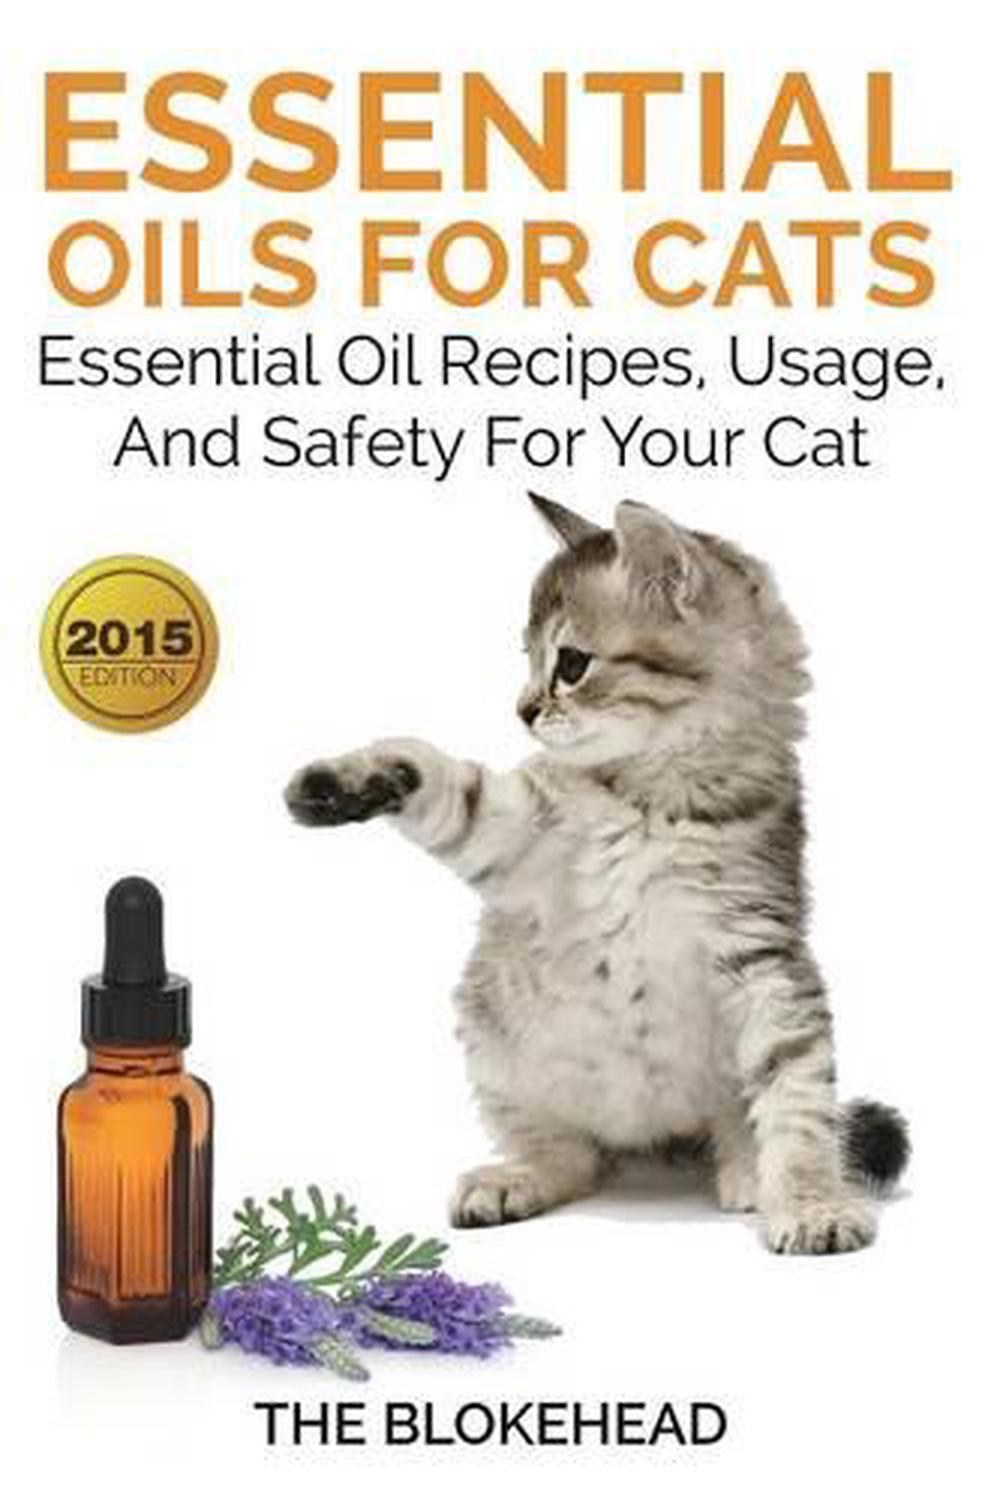 Essential Oils for Cats Essential Oil Recipes, Usage, and Safety for